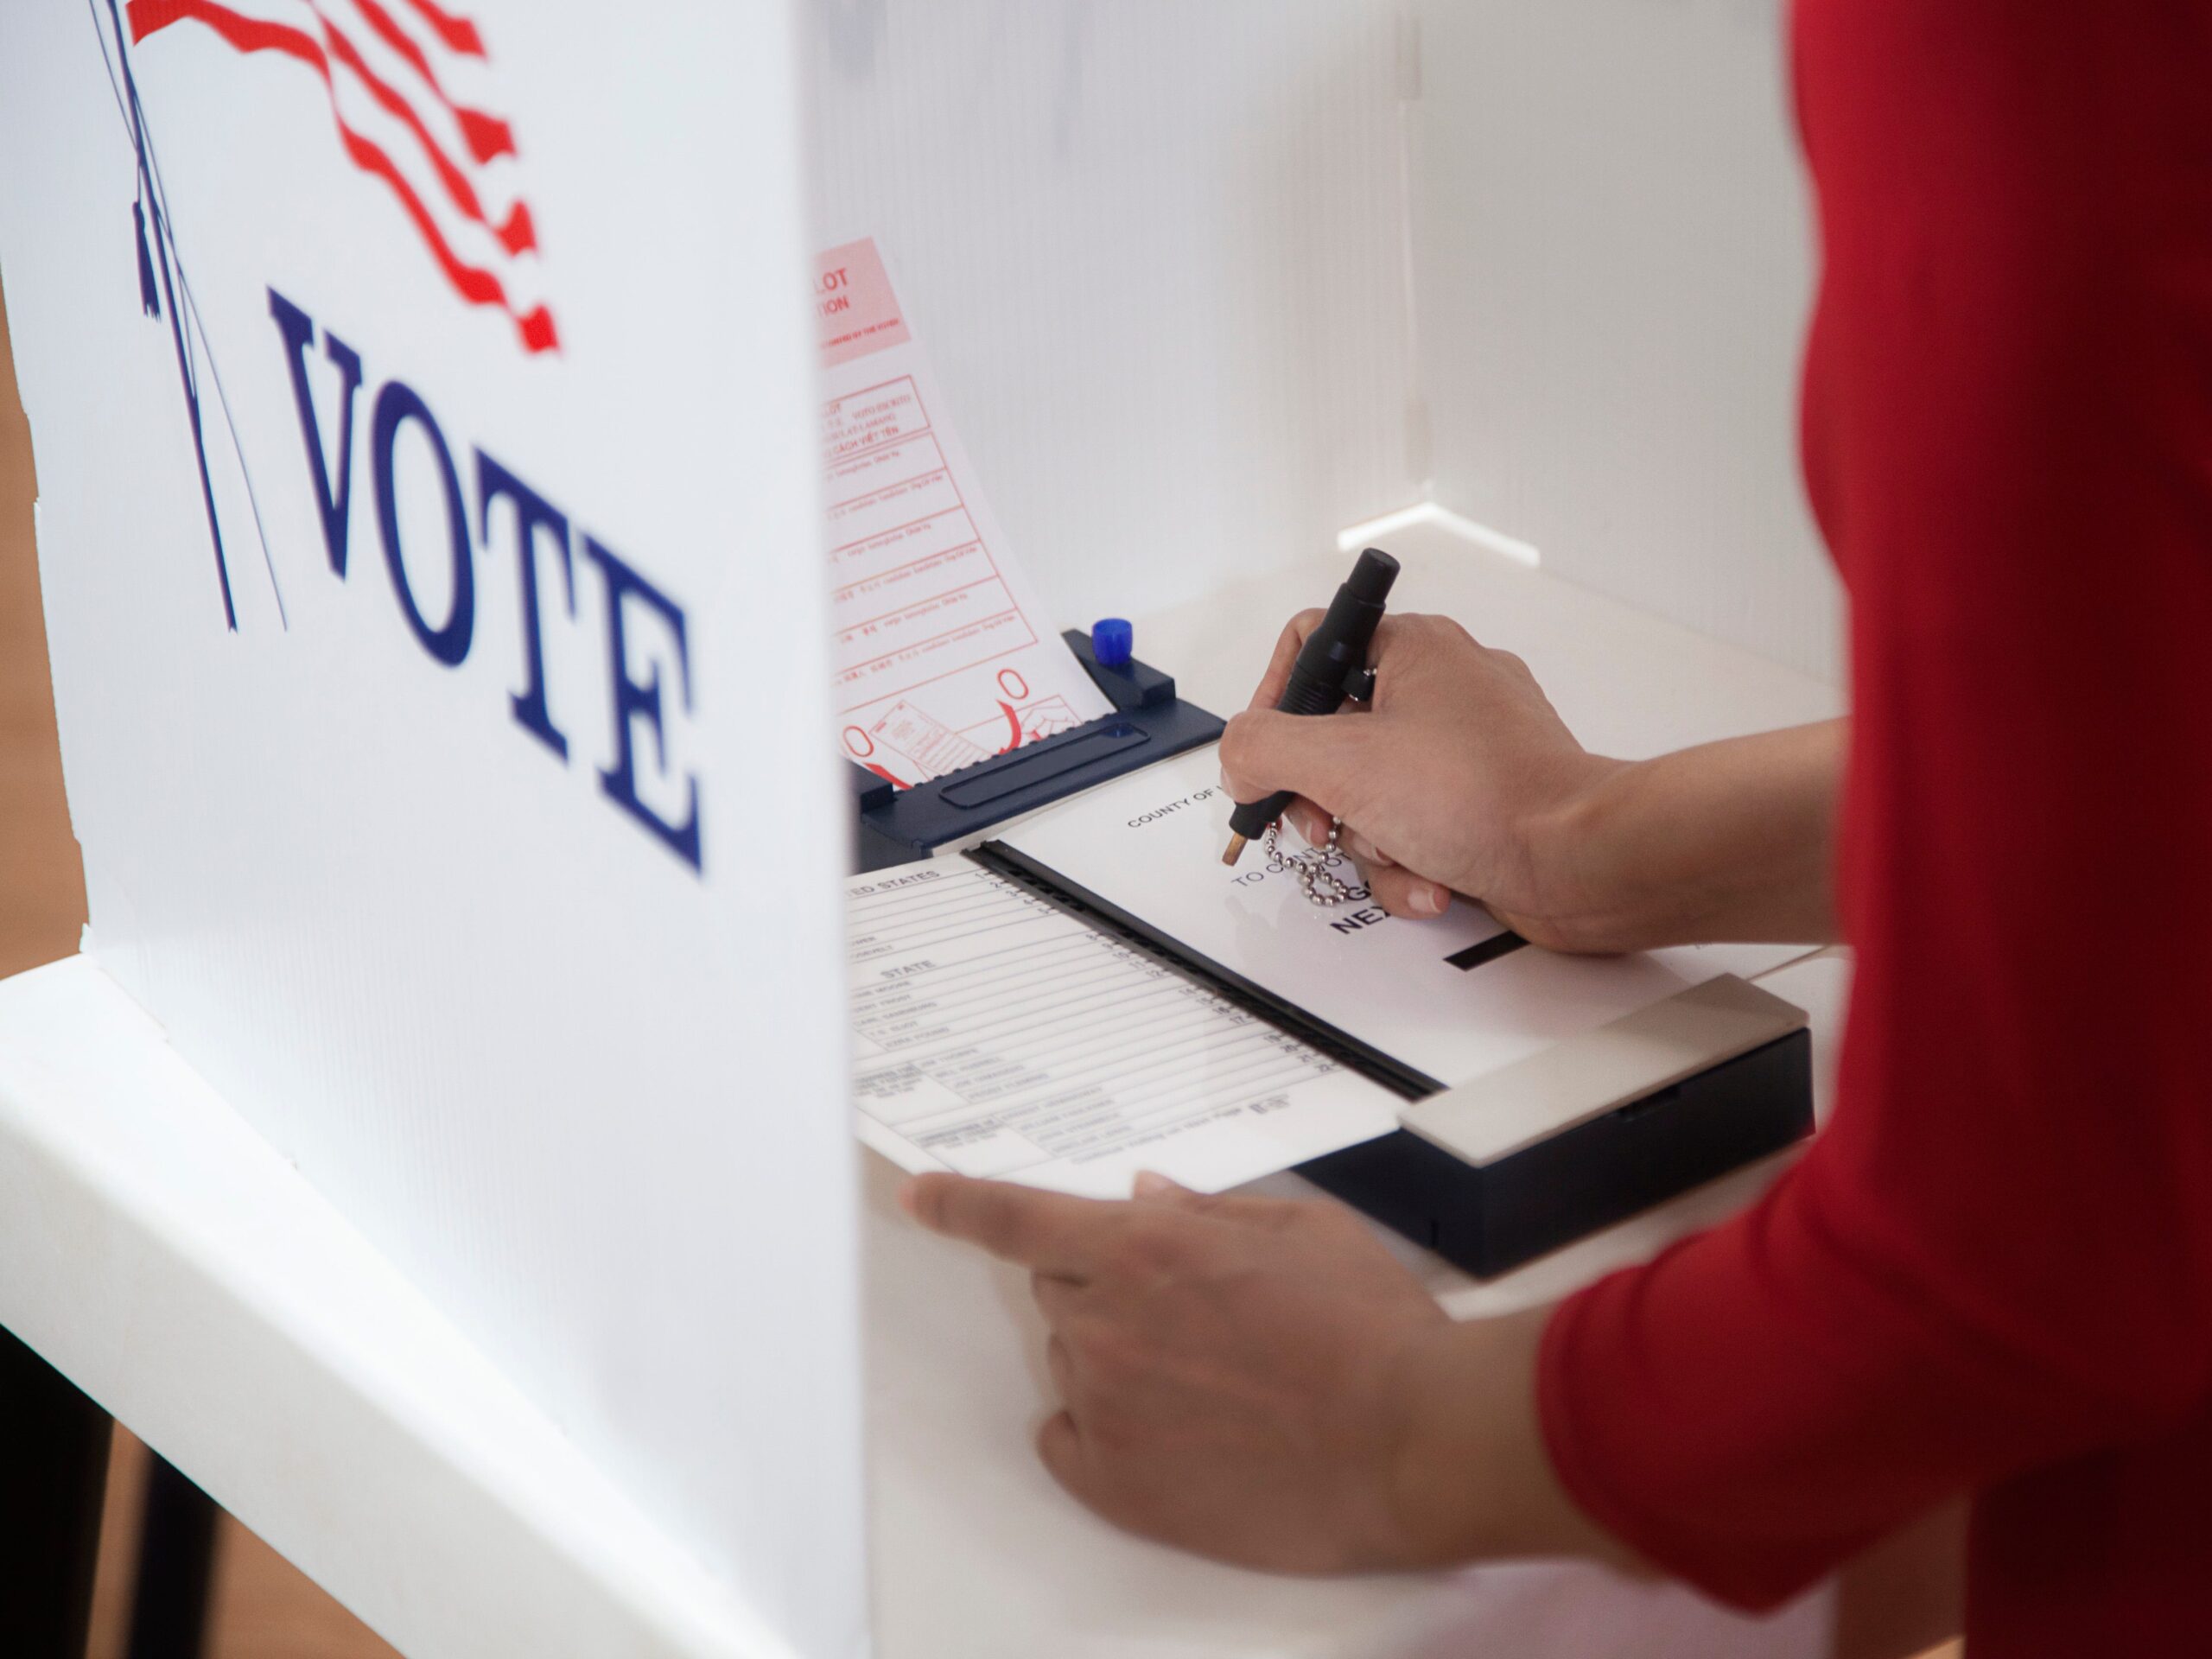 Stock photo of a voting booth